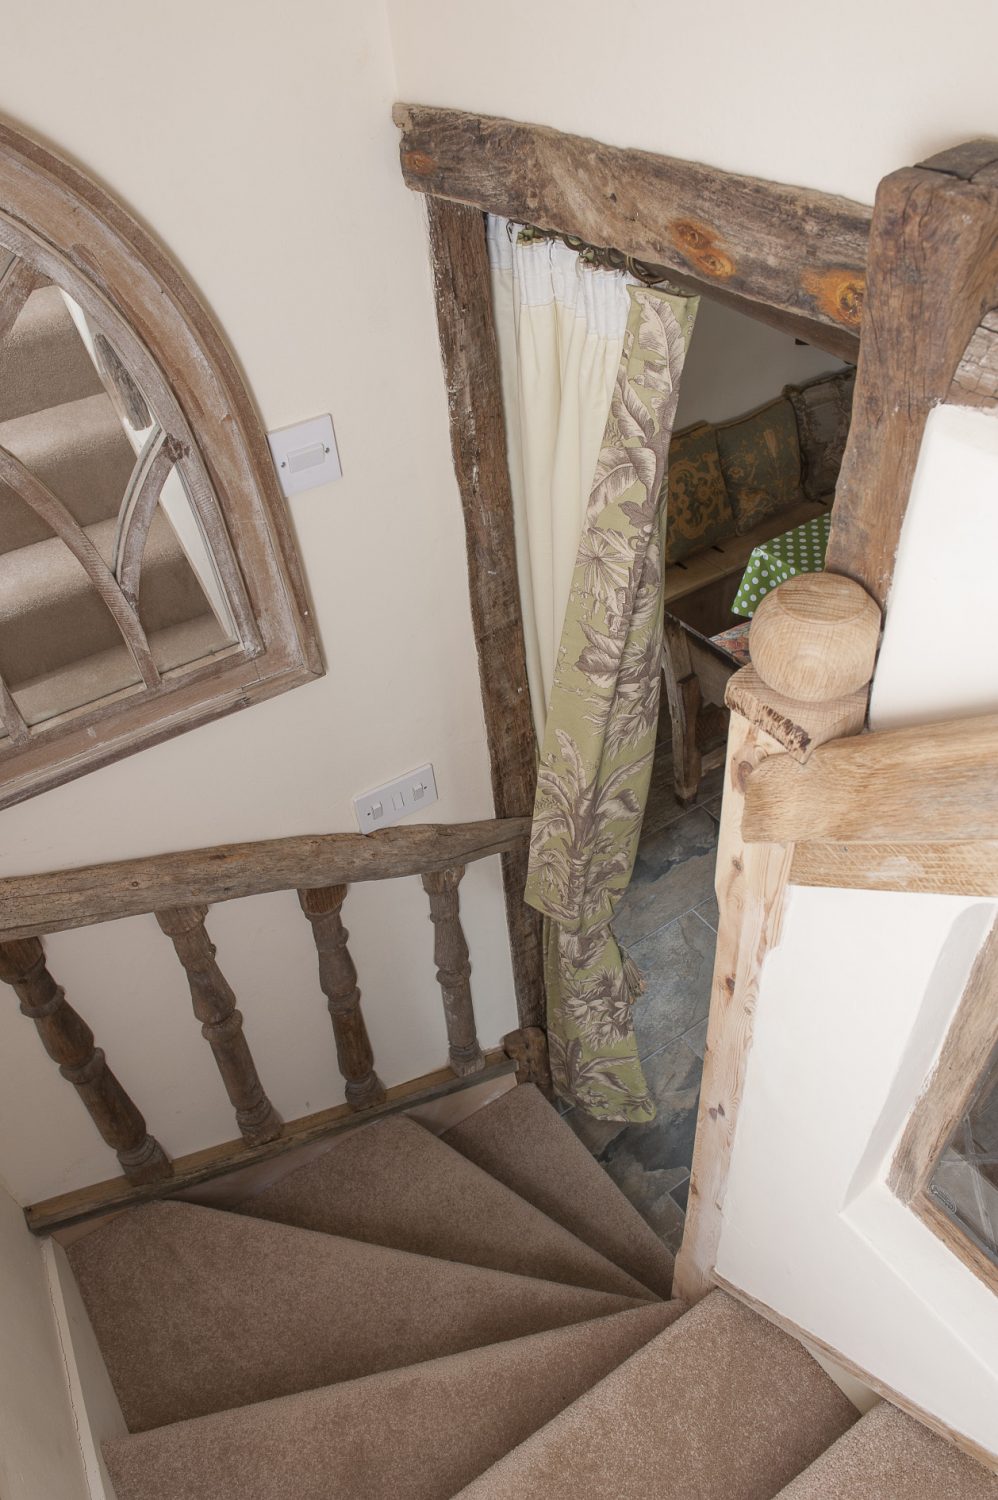 The stairway has been framed in ancient oak whilst oak spindles, left over from the grand reclaimed staircase in Caroline’s own barn home, have been set into the wallsThe stairway has been framed in ancient oak whilst oak spindles, left over from the grand reclaimed staircase in Caroline’s own barn home, have been set into the walls